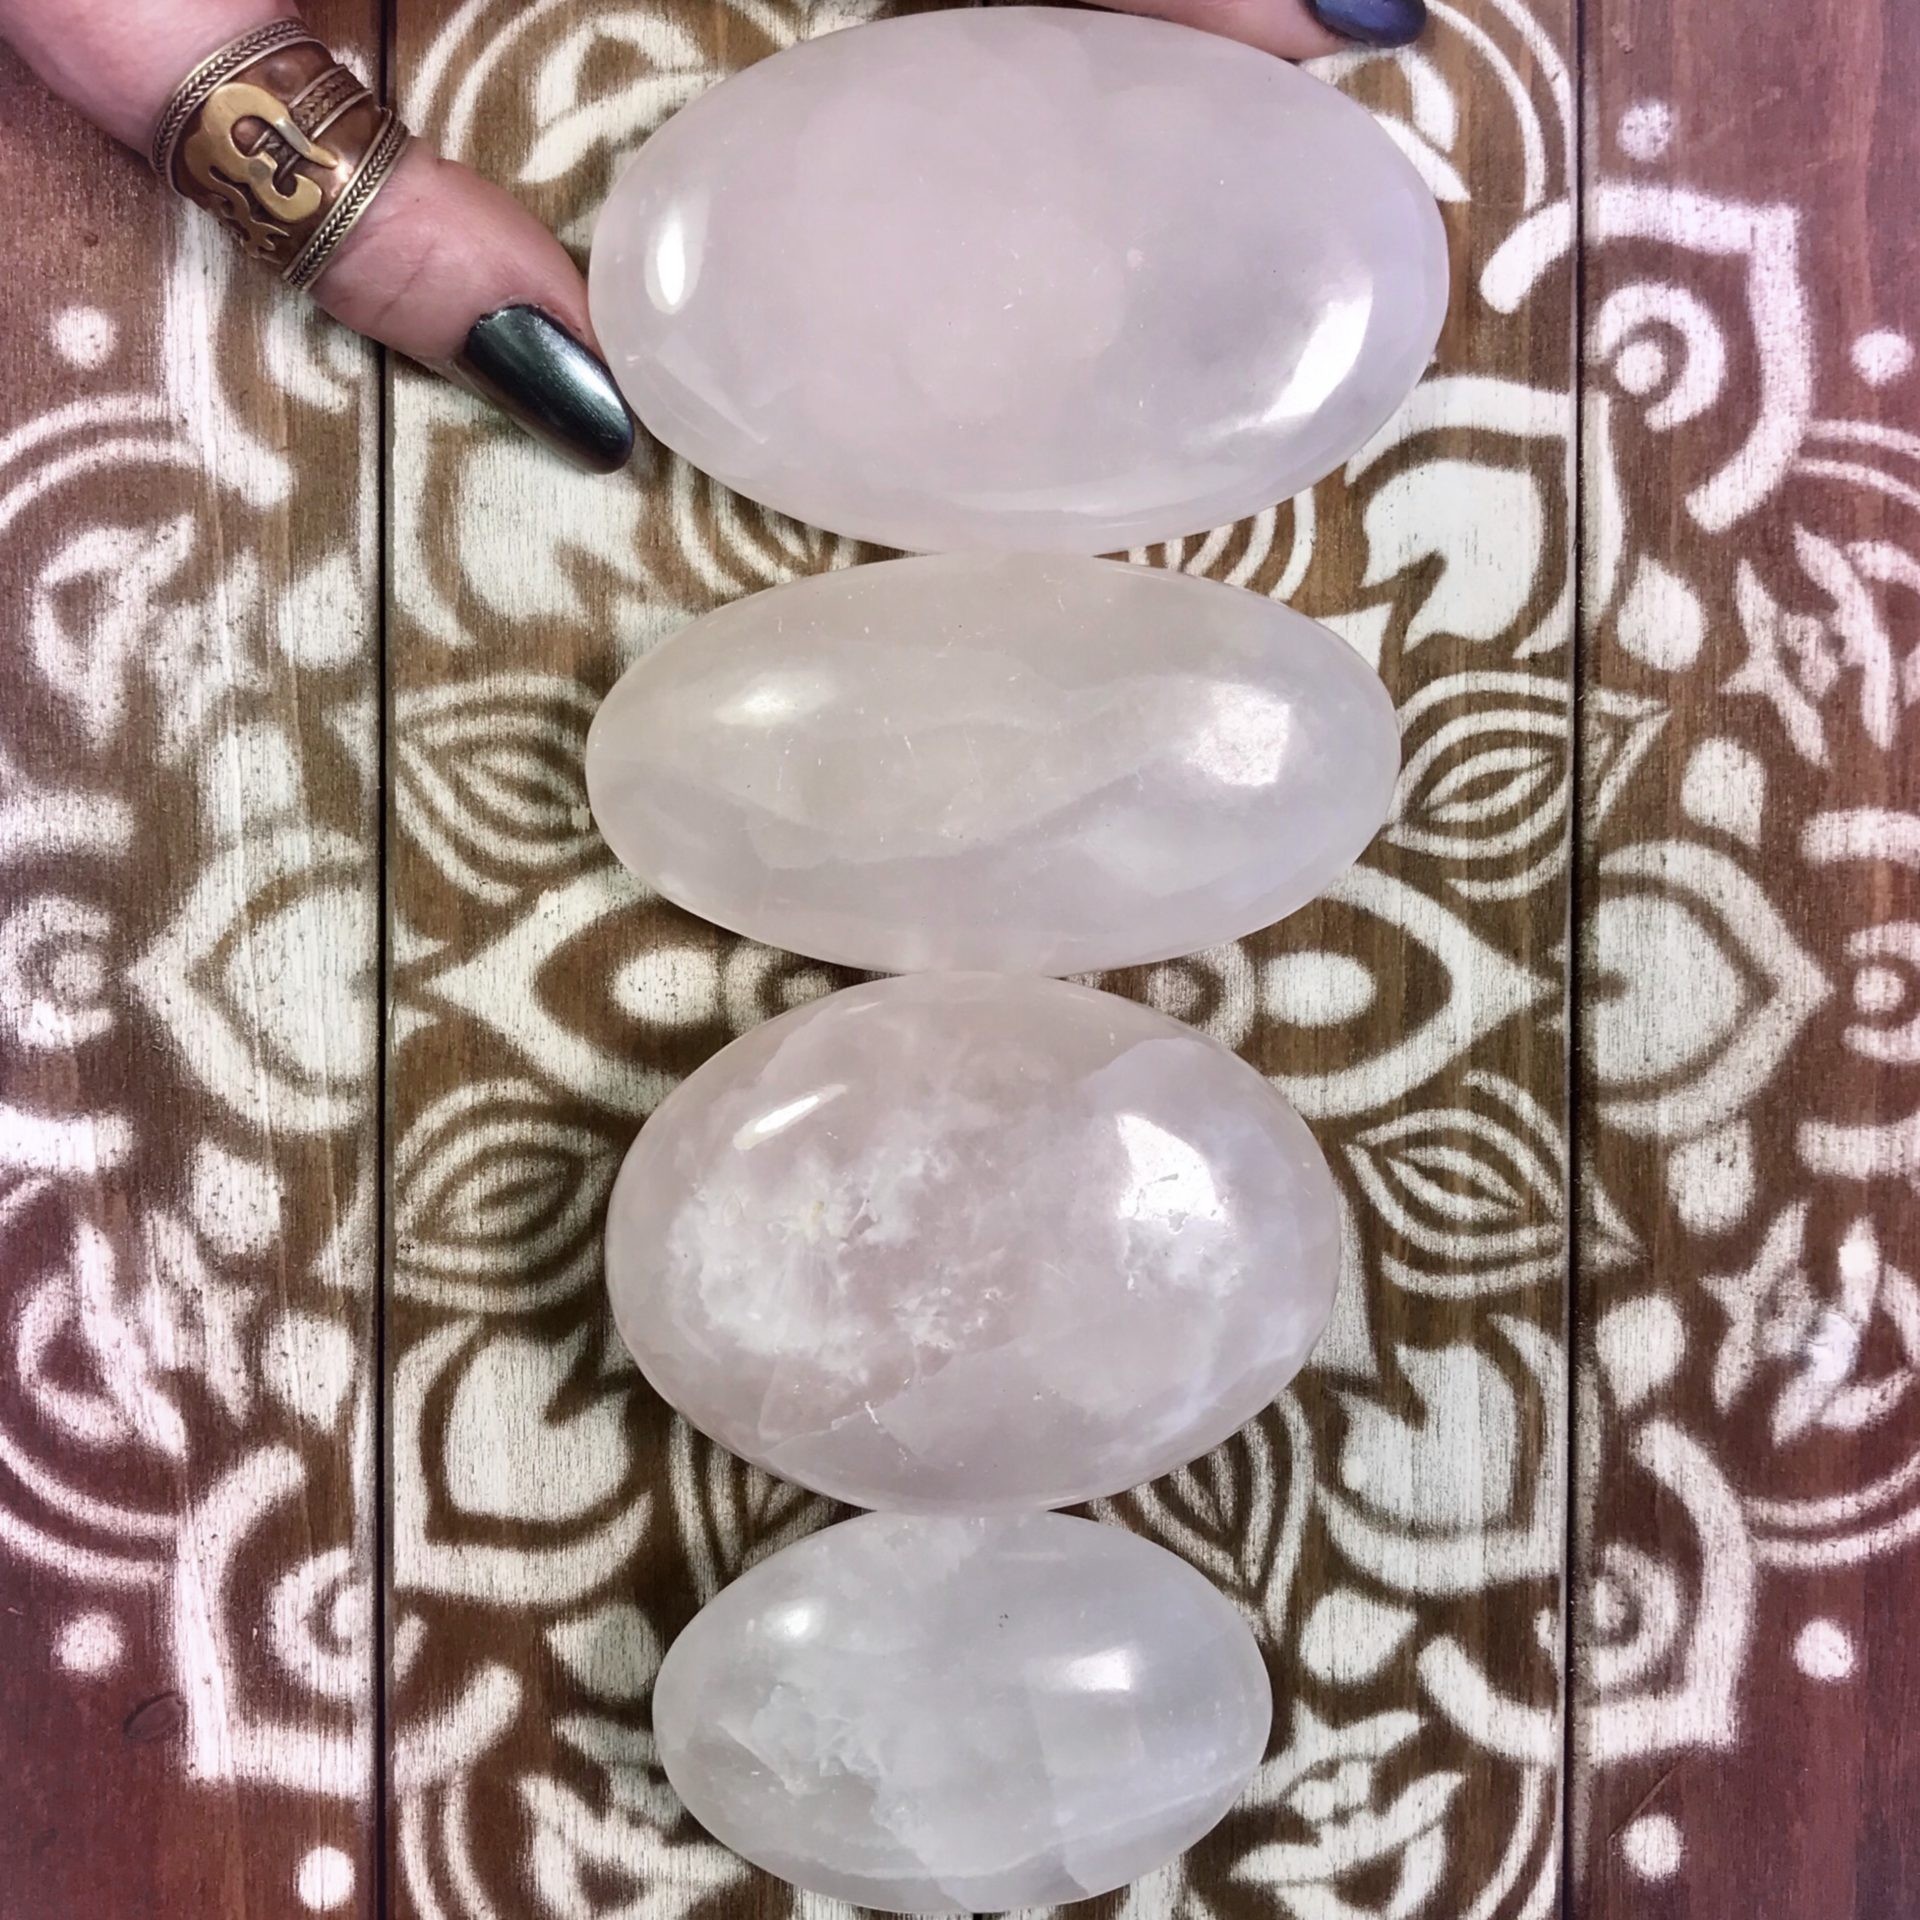 Sage Goddess - Pink gemstones resonate with your Heart